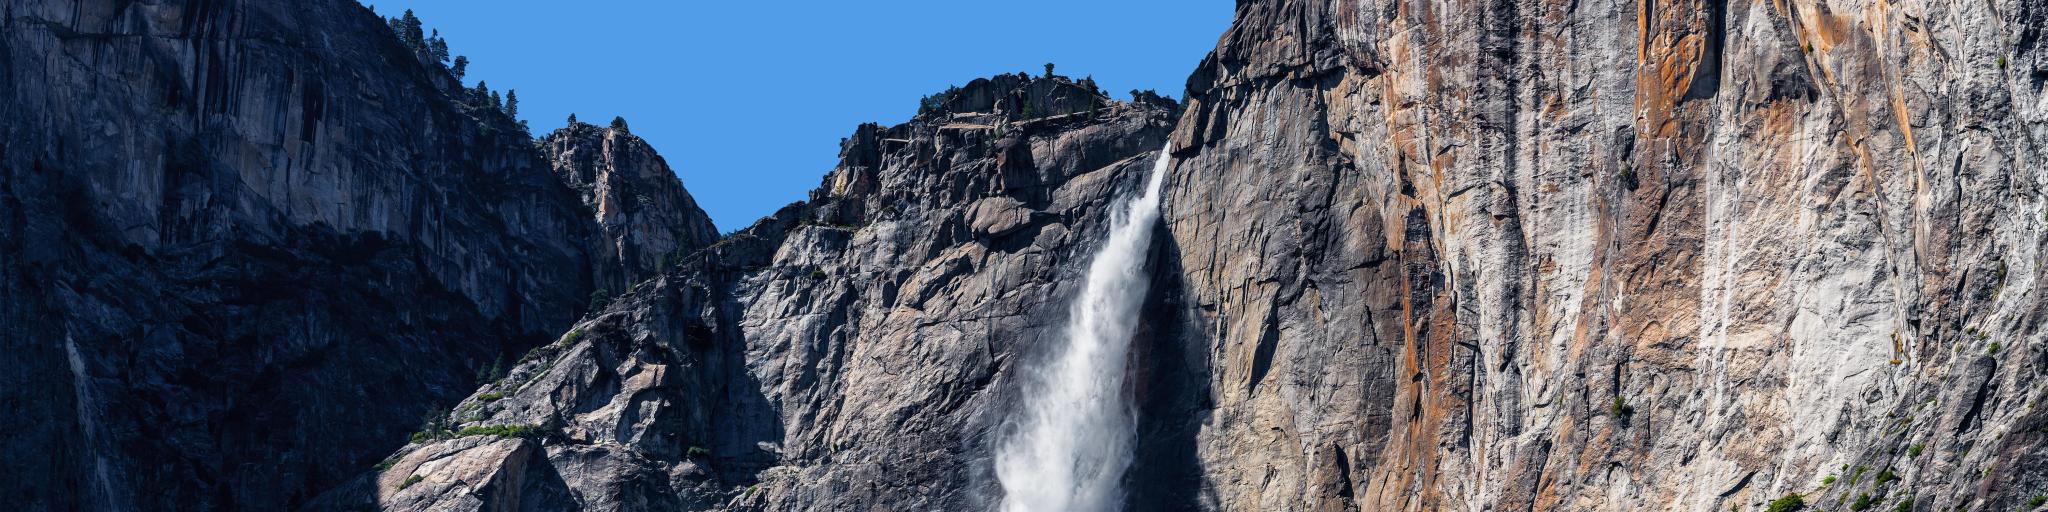 Crashing waters falling from Lower Yosemite Waterfall, with bright blue skies in background